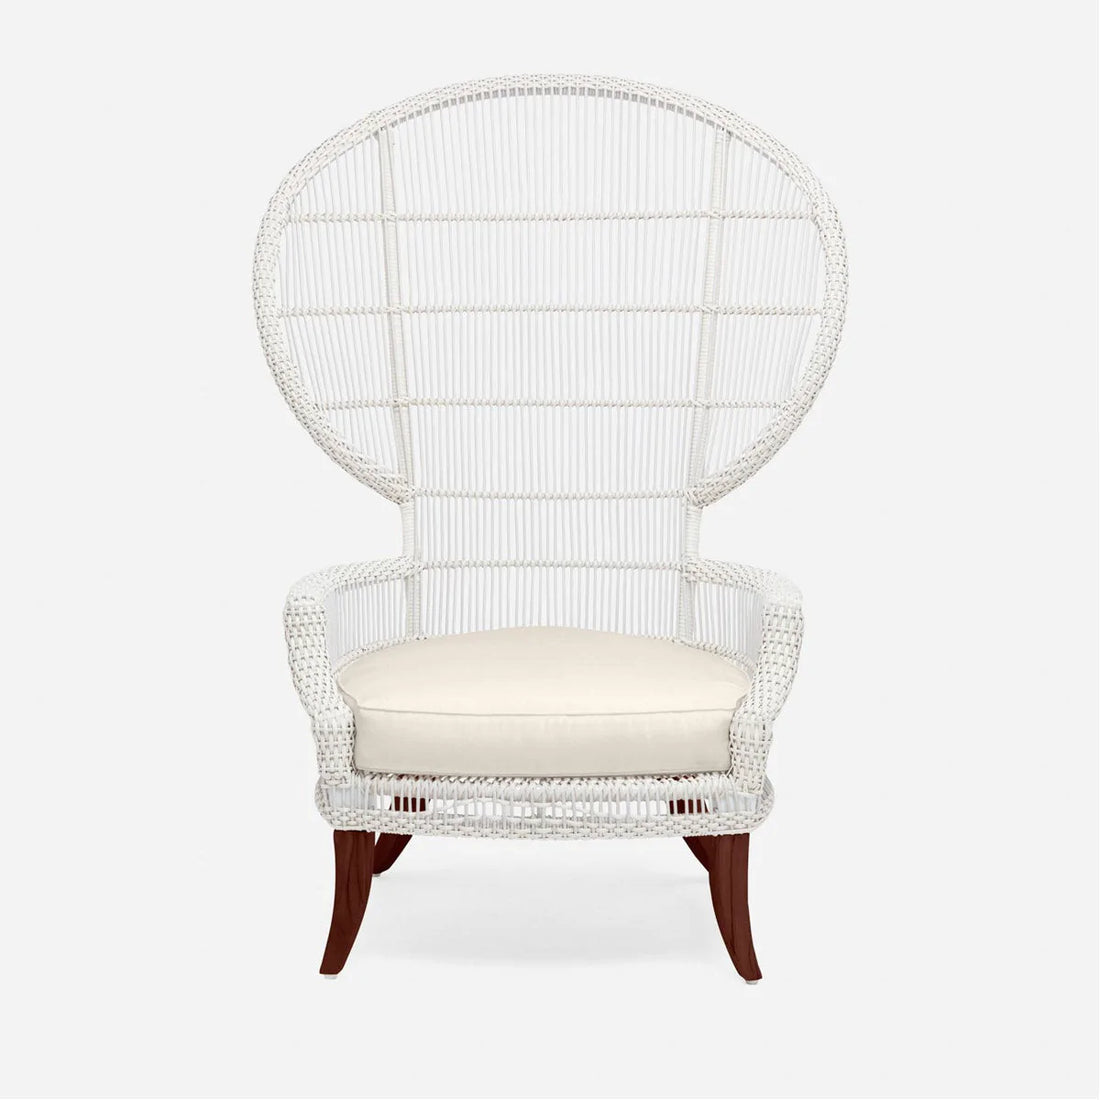 Made Goods Aurora Woven Wingback Outdoor Lounge Chair in Danube Fabric